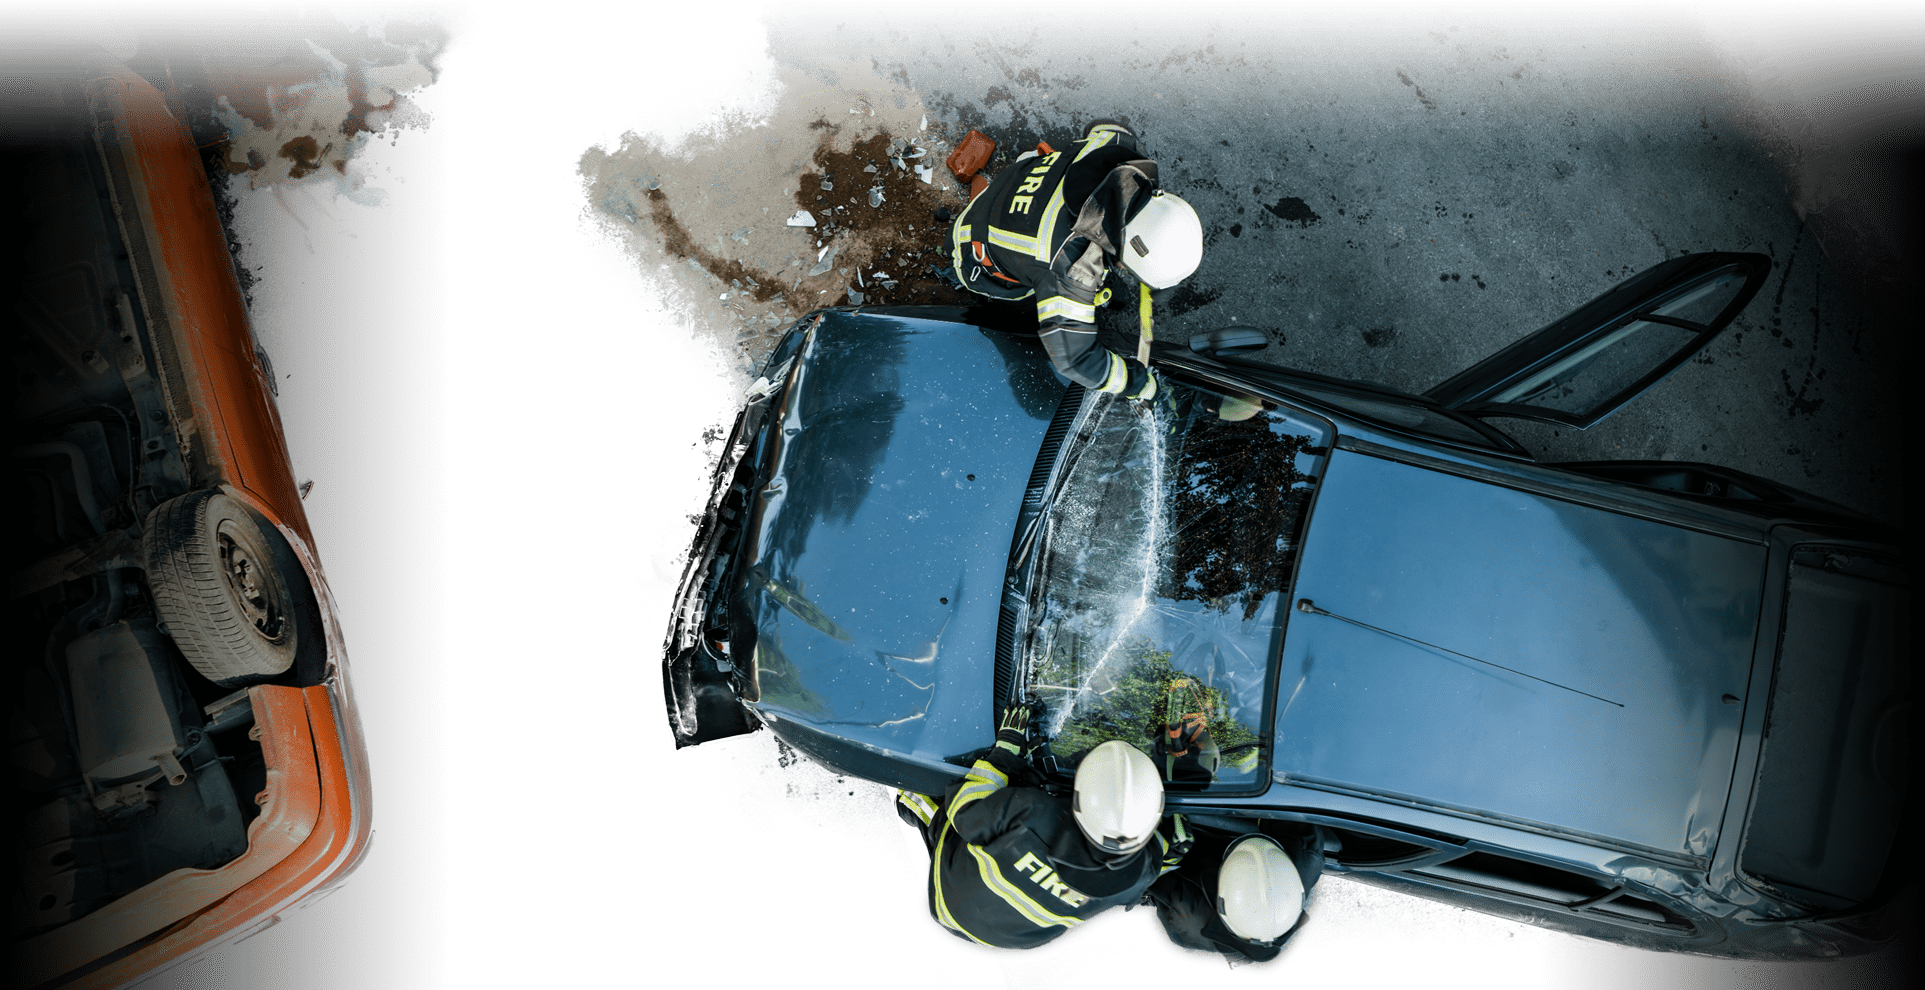 an overhead view of emergency responders are rescuing a motorist from a crashed vehicle